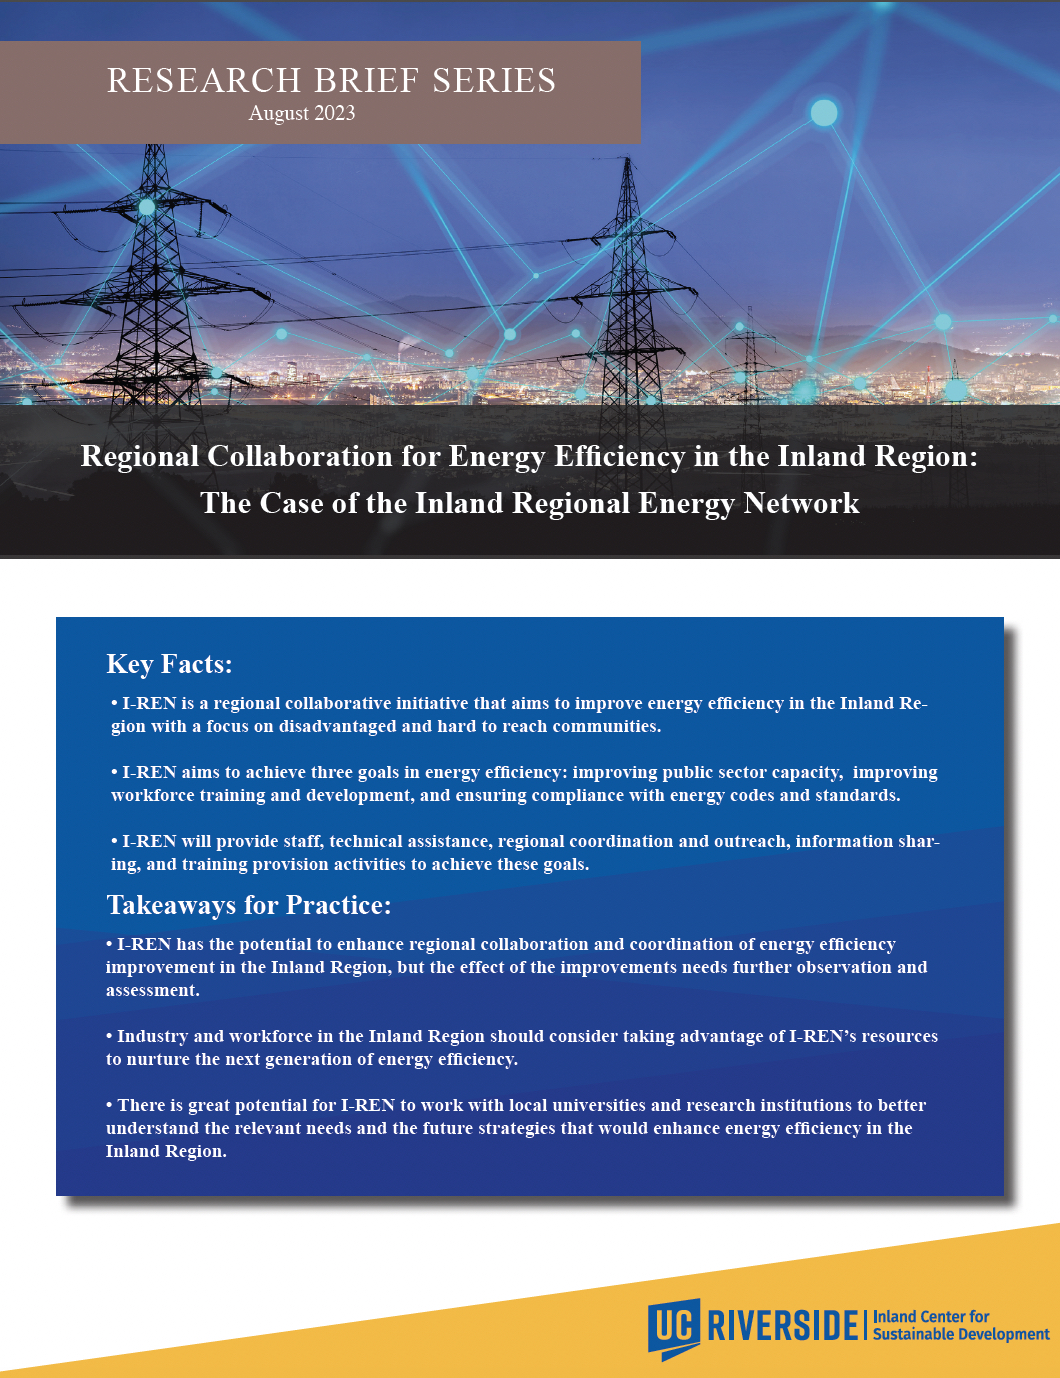 Regional Collaboration for Energy Efficiency in the Inland Region: The CAse of the Inland Regional Energy Network